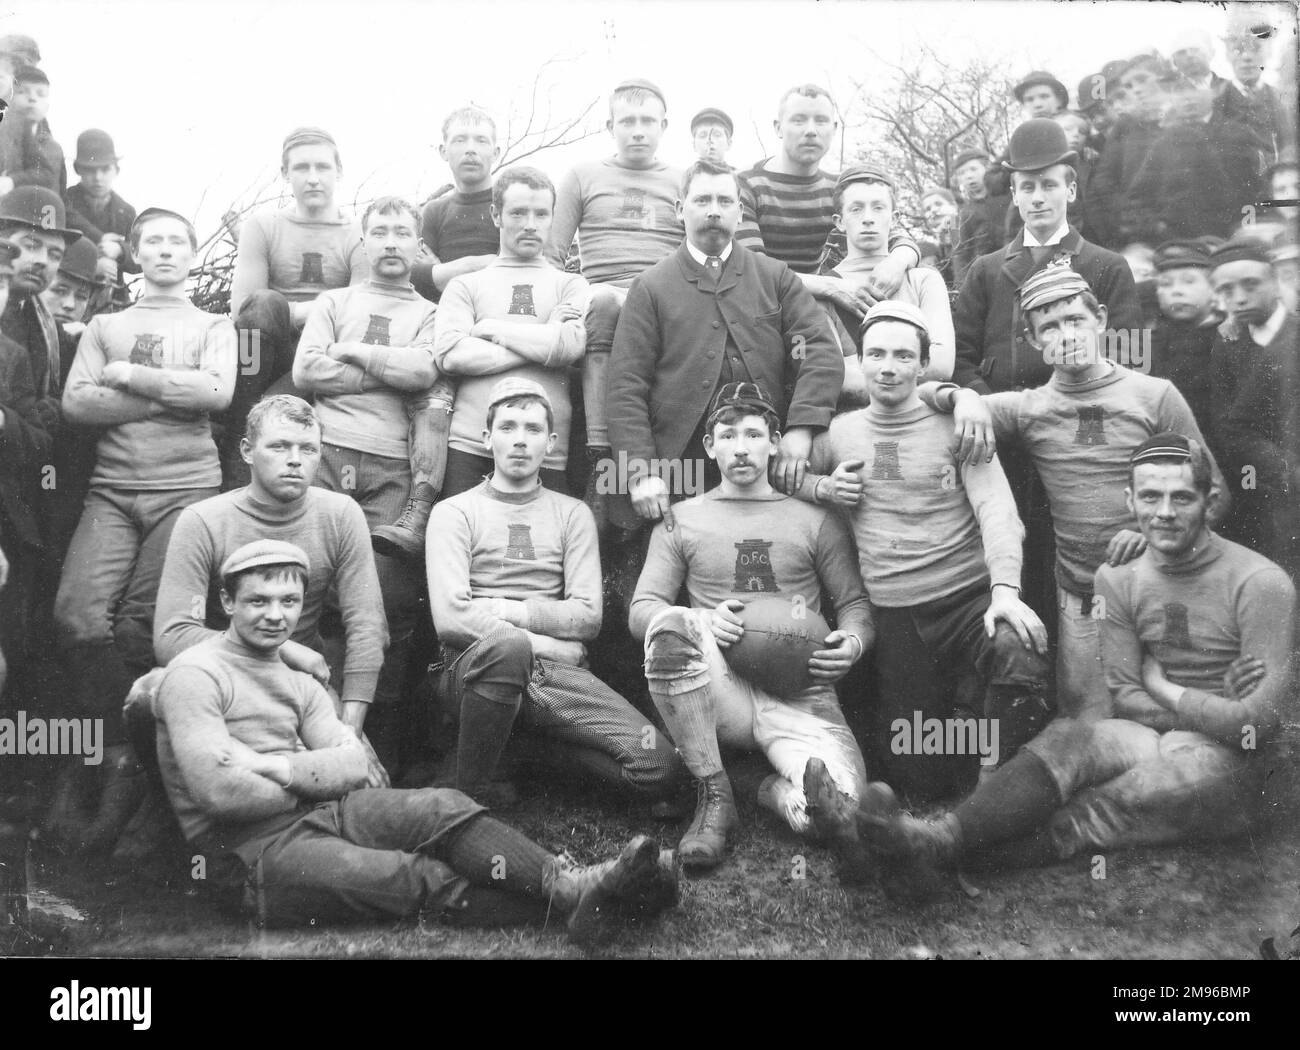 A group photo of  the Crickhowell Rugby Football team, with a few of the club supporters, in Crickhowell, Powys, Mid Wales. Stock Photo